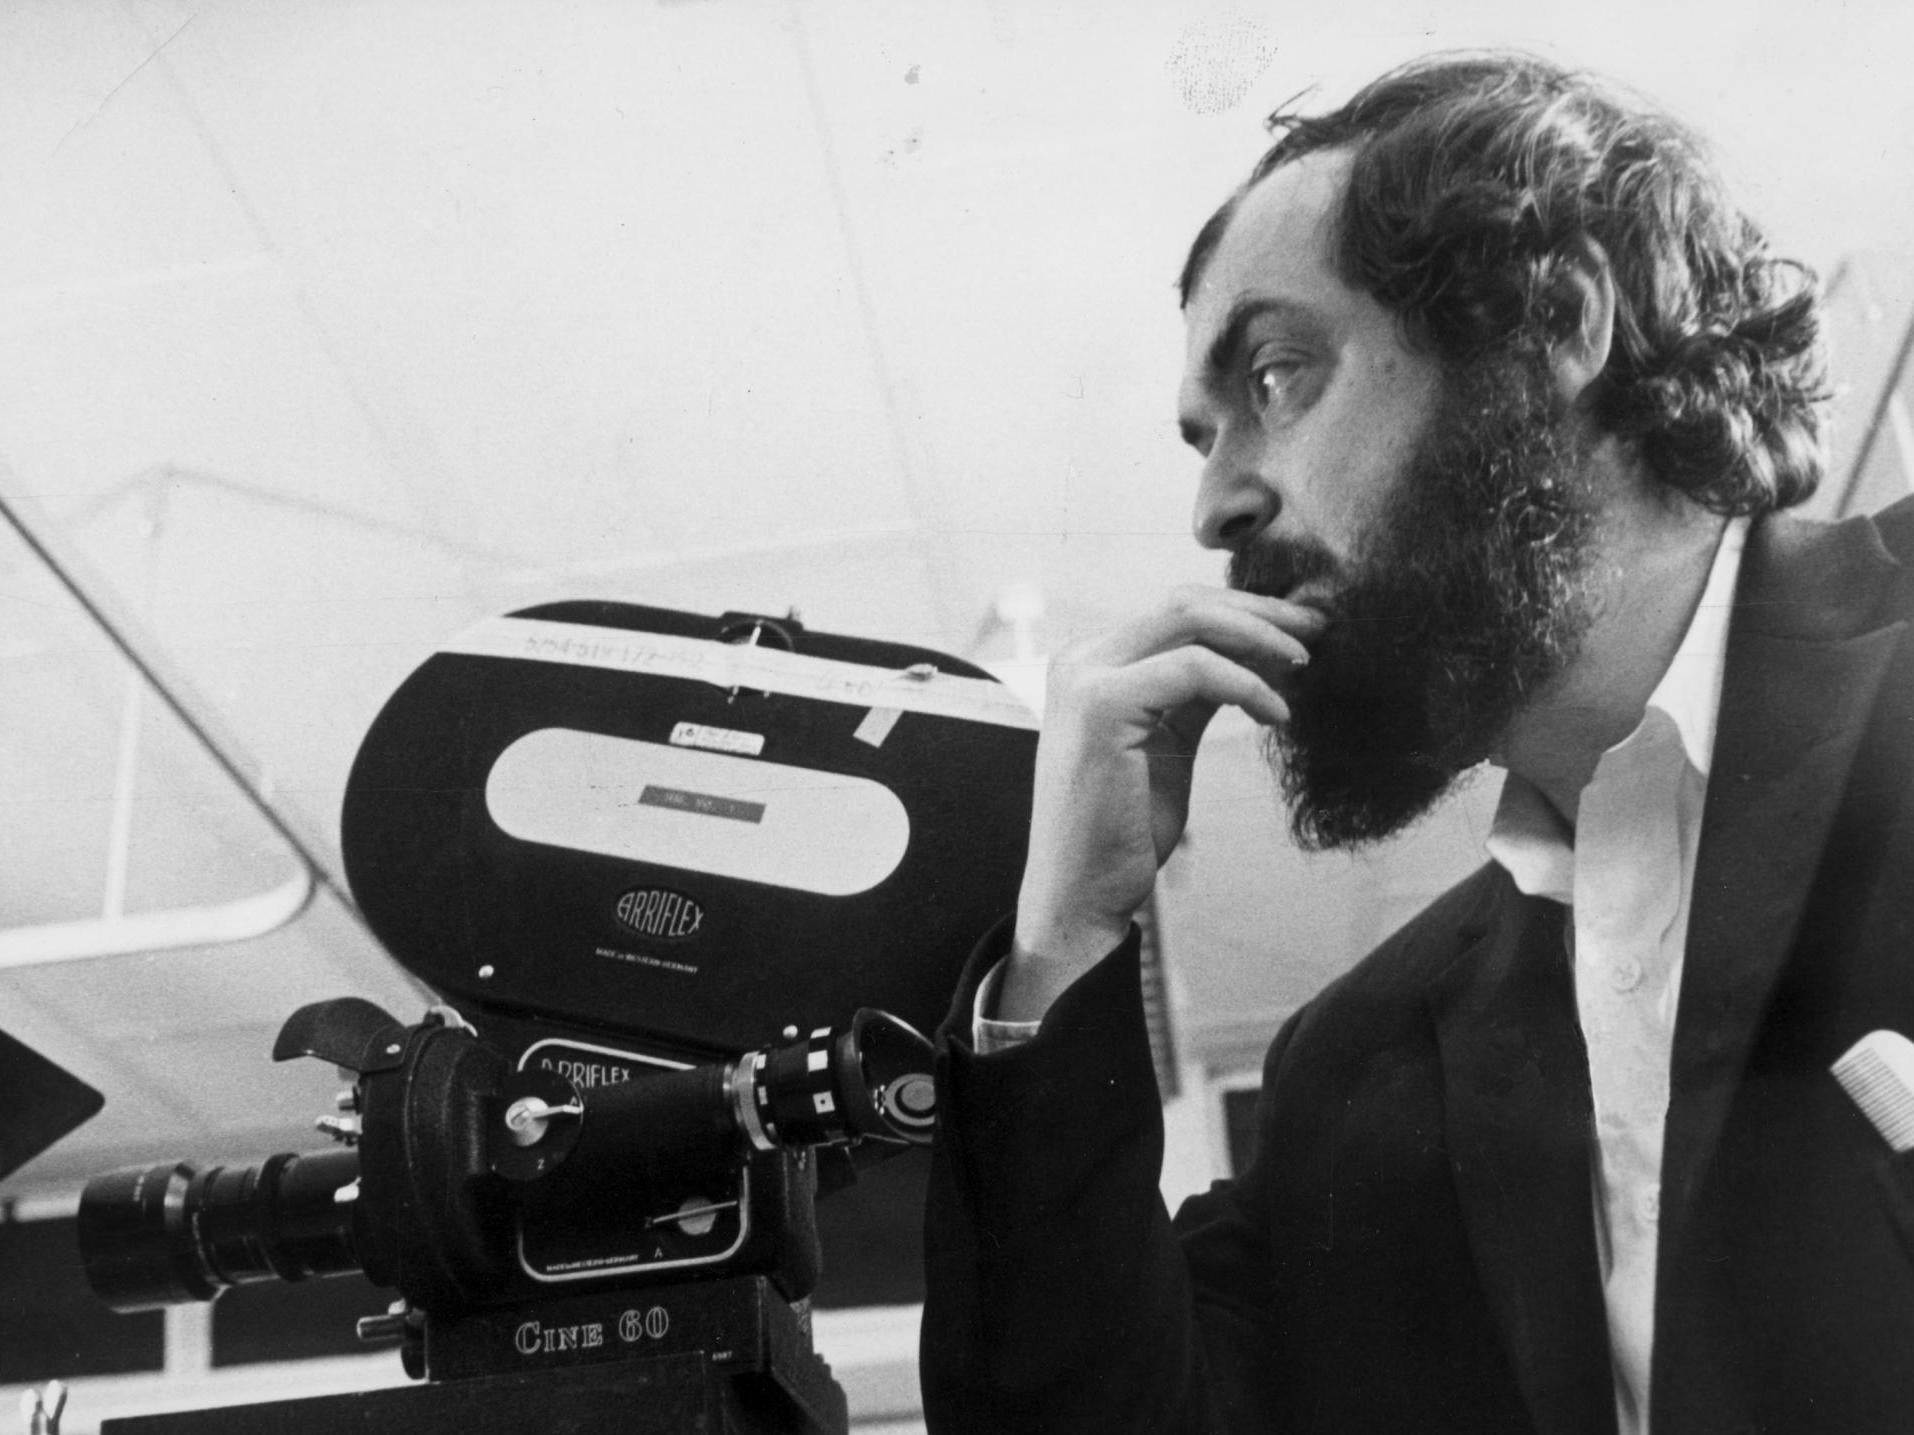 Stanley Kubrick, the late ‘2001: A Space Odyssey’ director